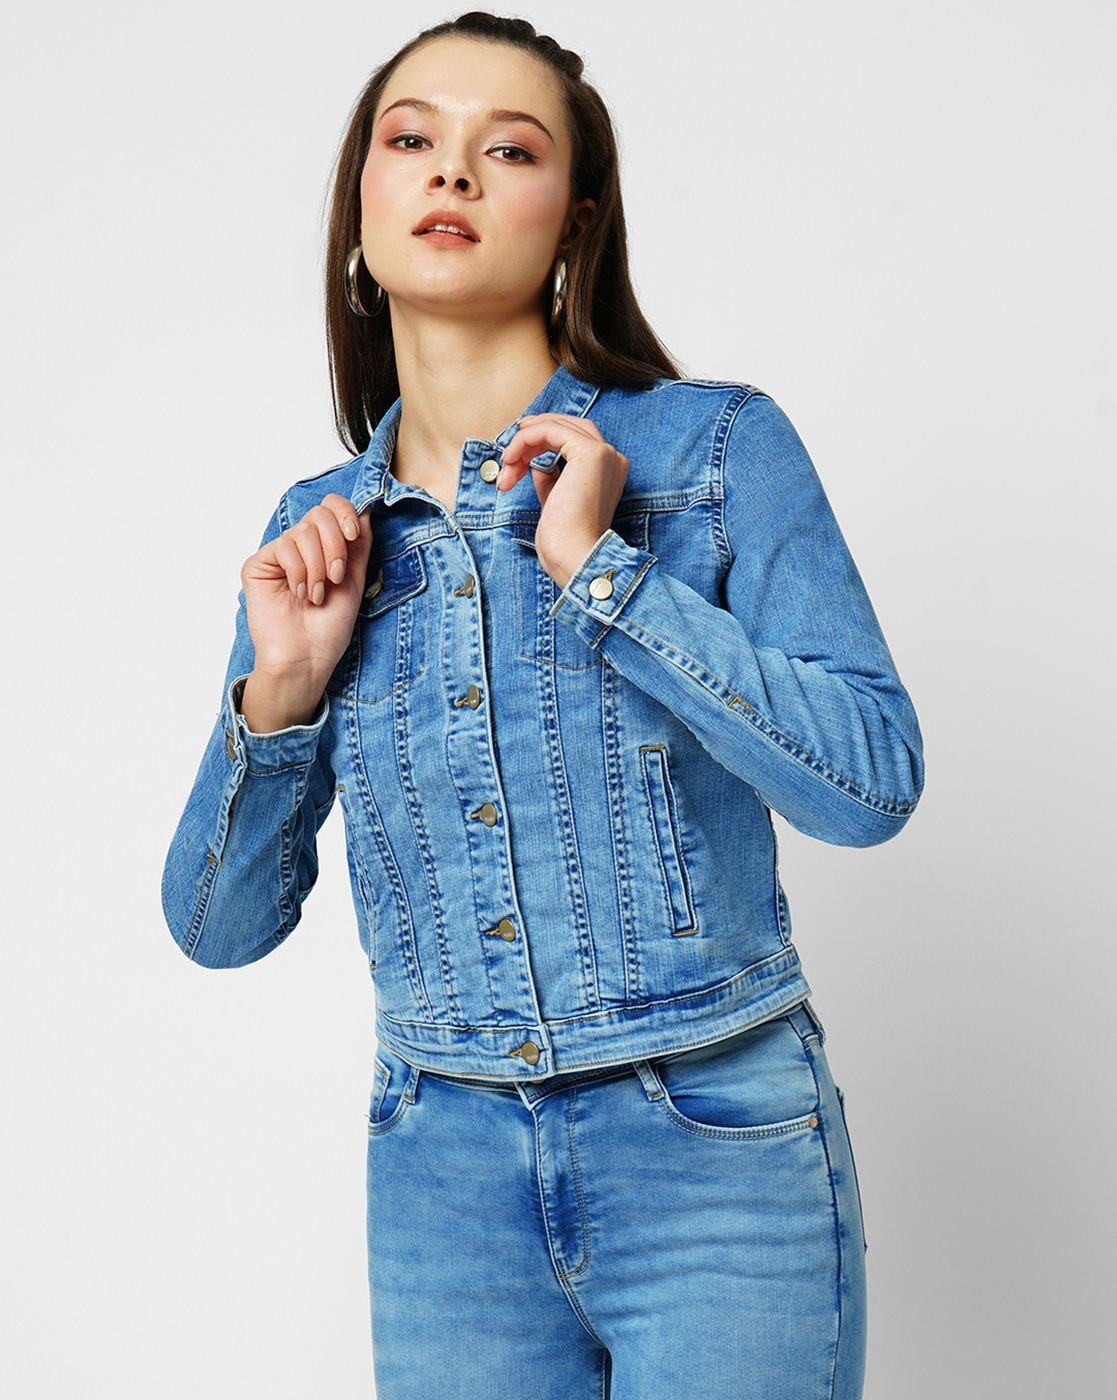 Light Blue Jeans with Blue Denim Jacket Outfits For Women (11 ideas &  outfits) | Lookastic